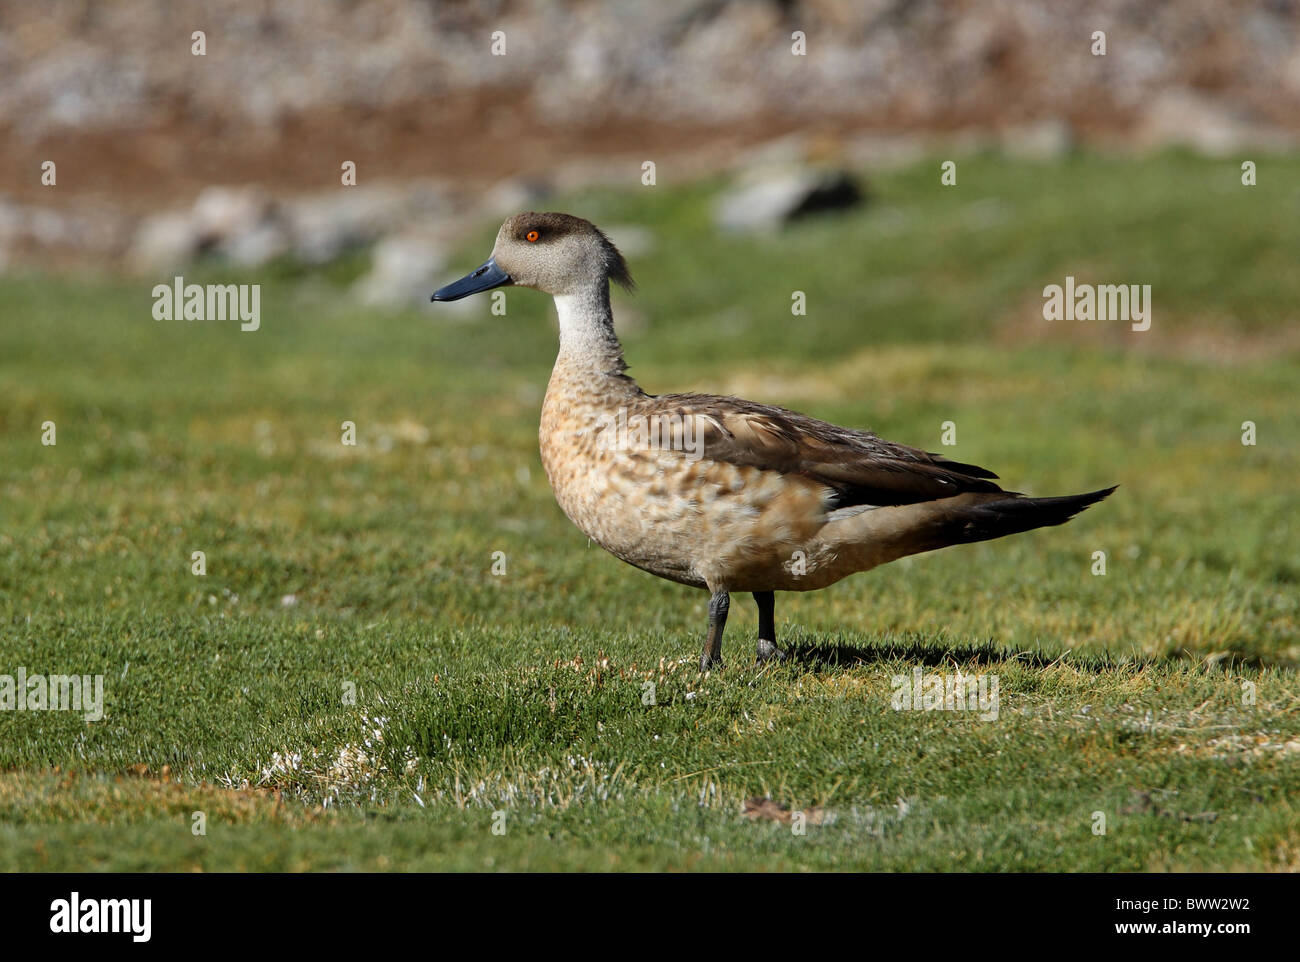 Crested Duck (Lophonetta specularioides alticola) adult, standing on short grass in puna, Jujuy, Argentina, january Stock Photo